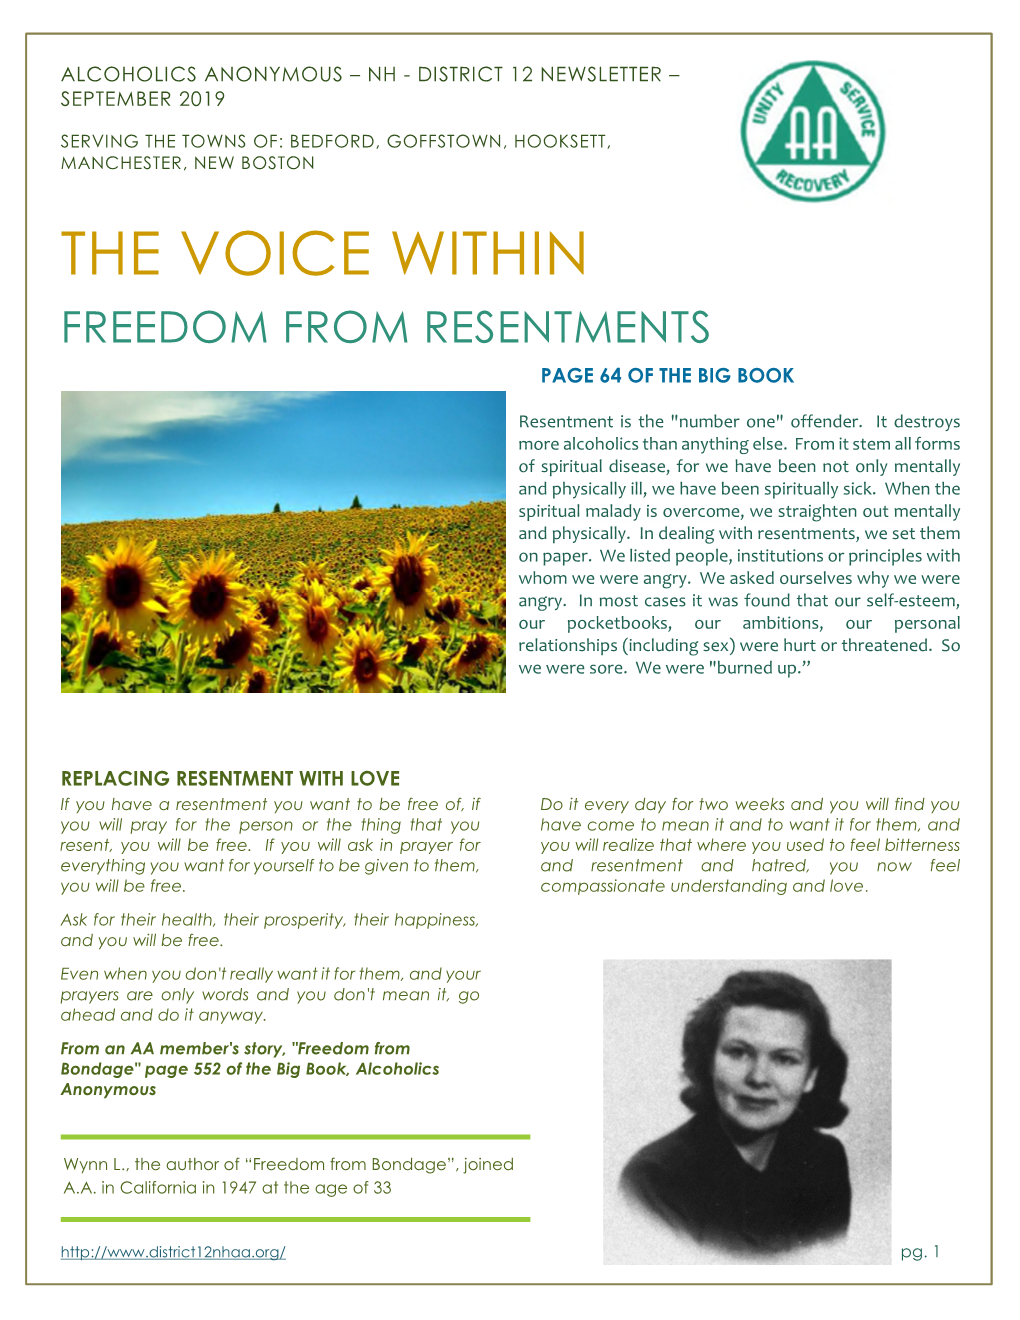 The Voice Within Freedom from Resentments Page 64 of the Big Book